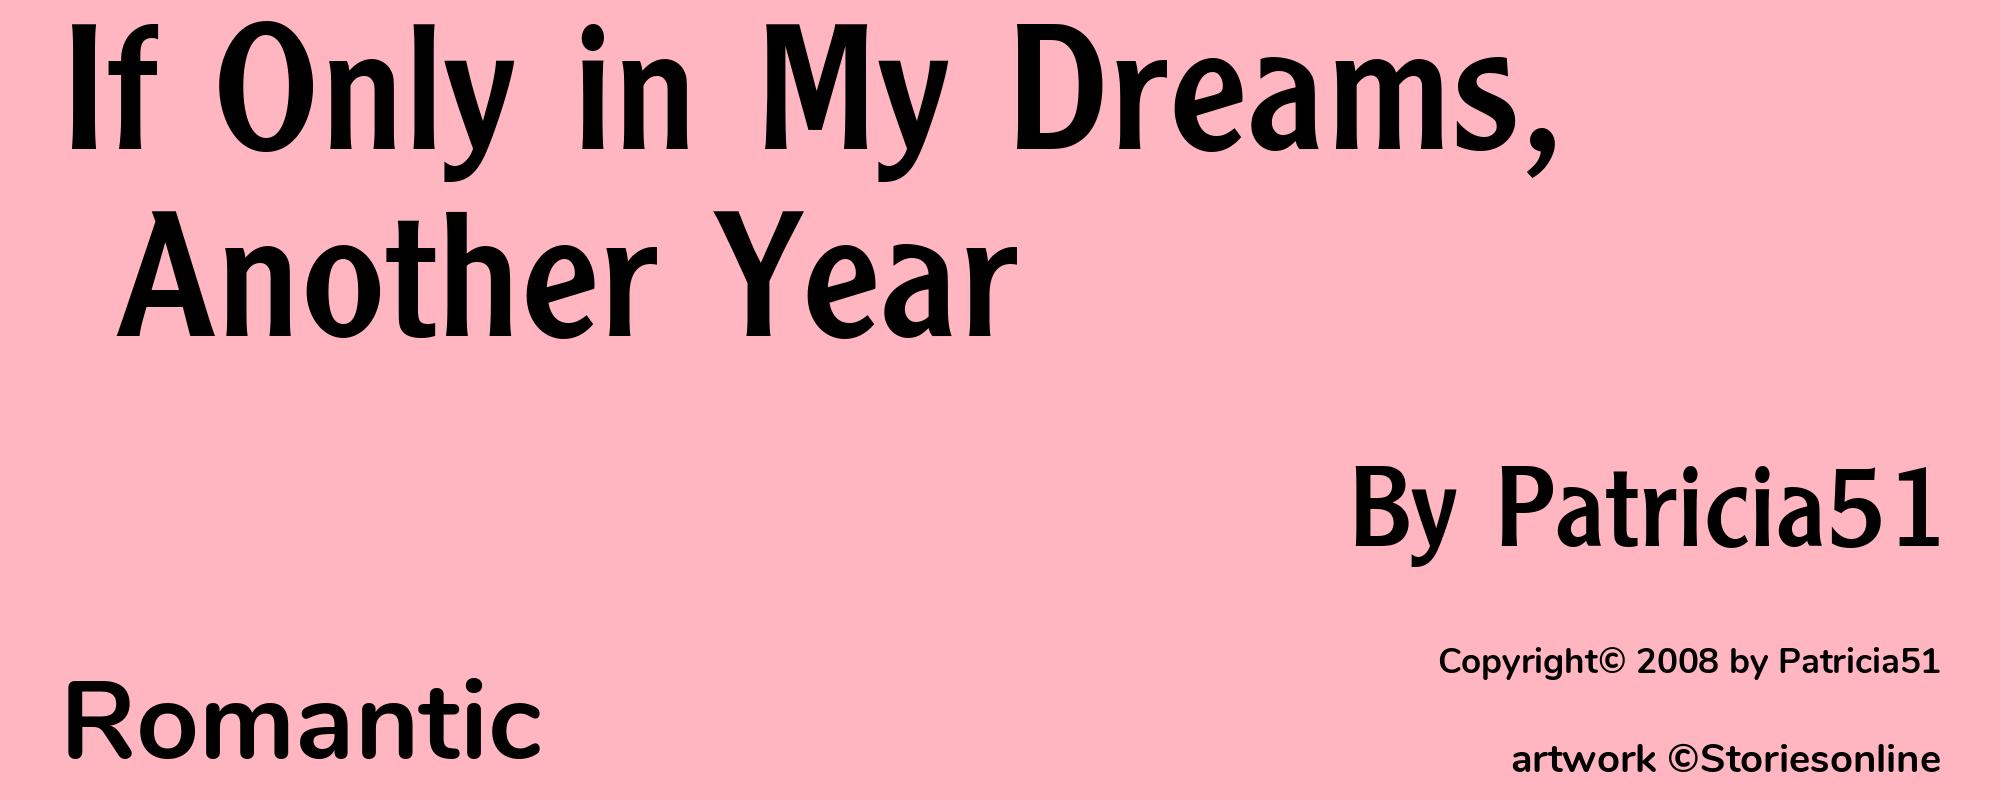 If Only in My Dreams, Another Year - Cover